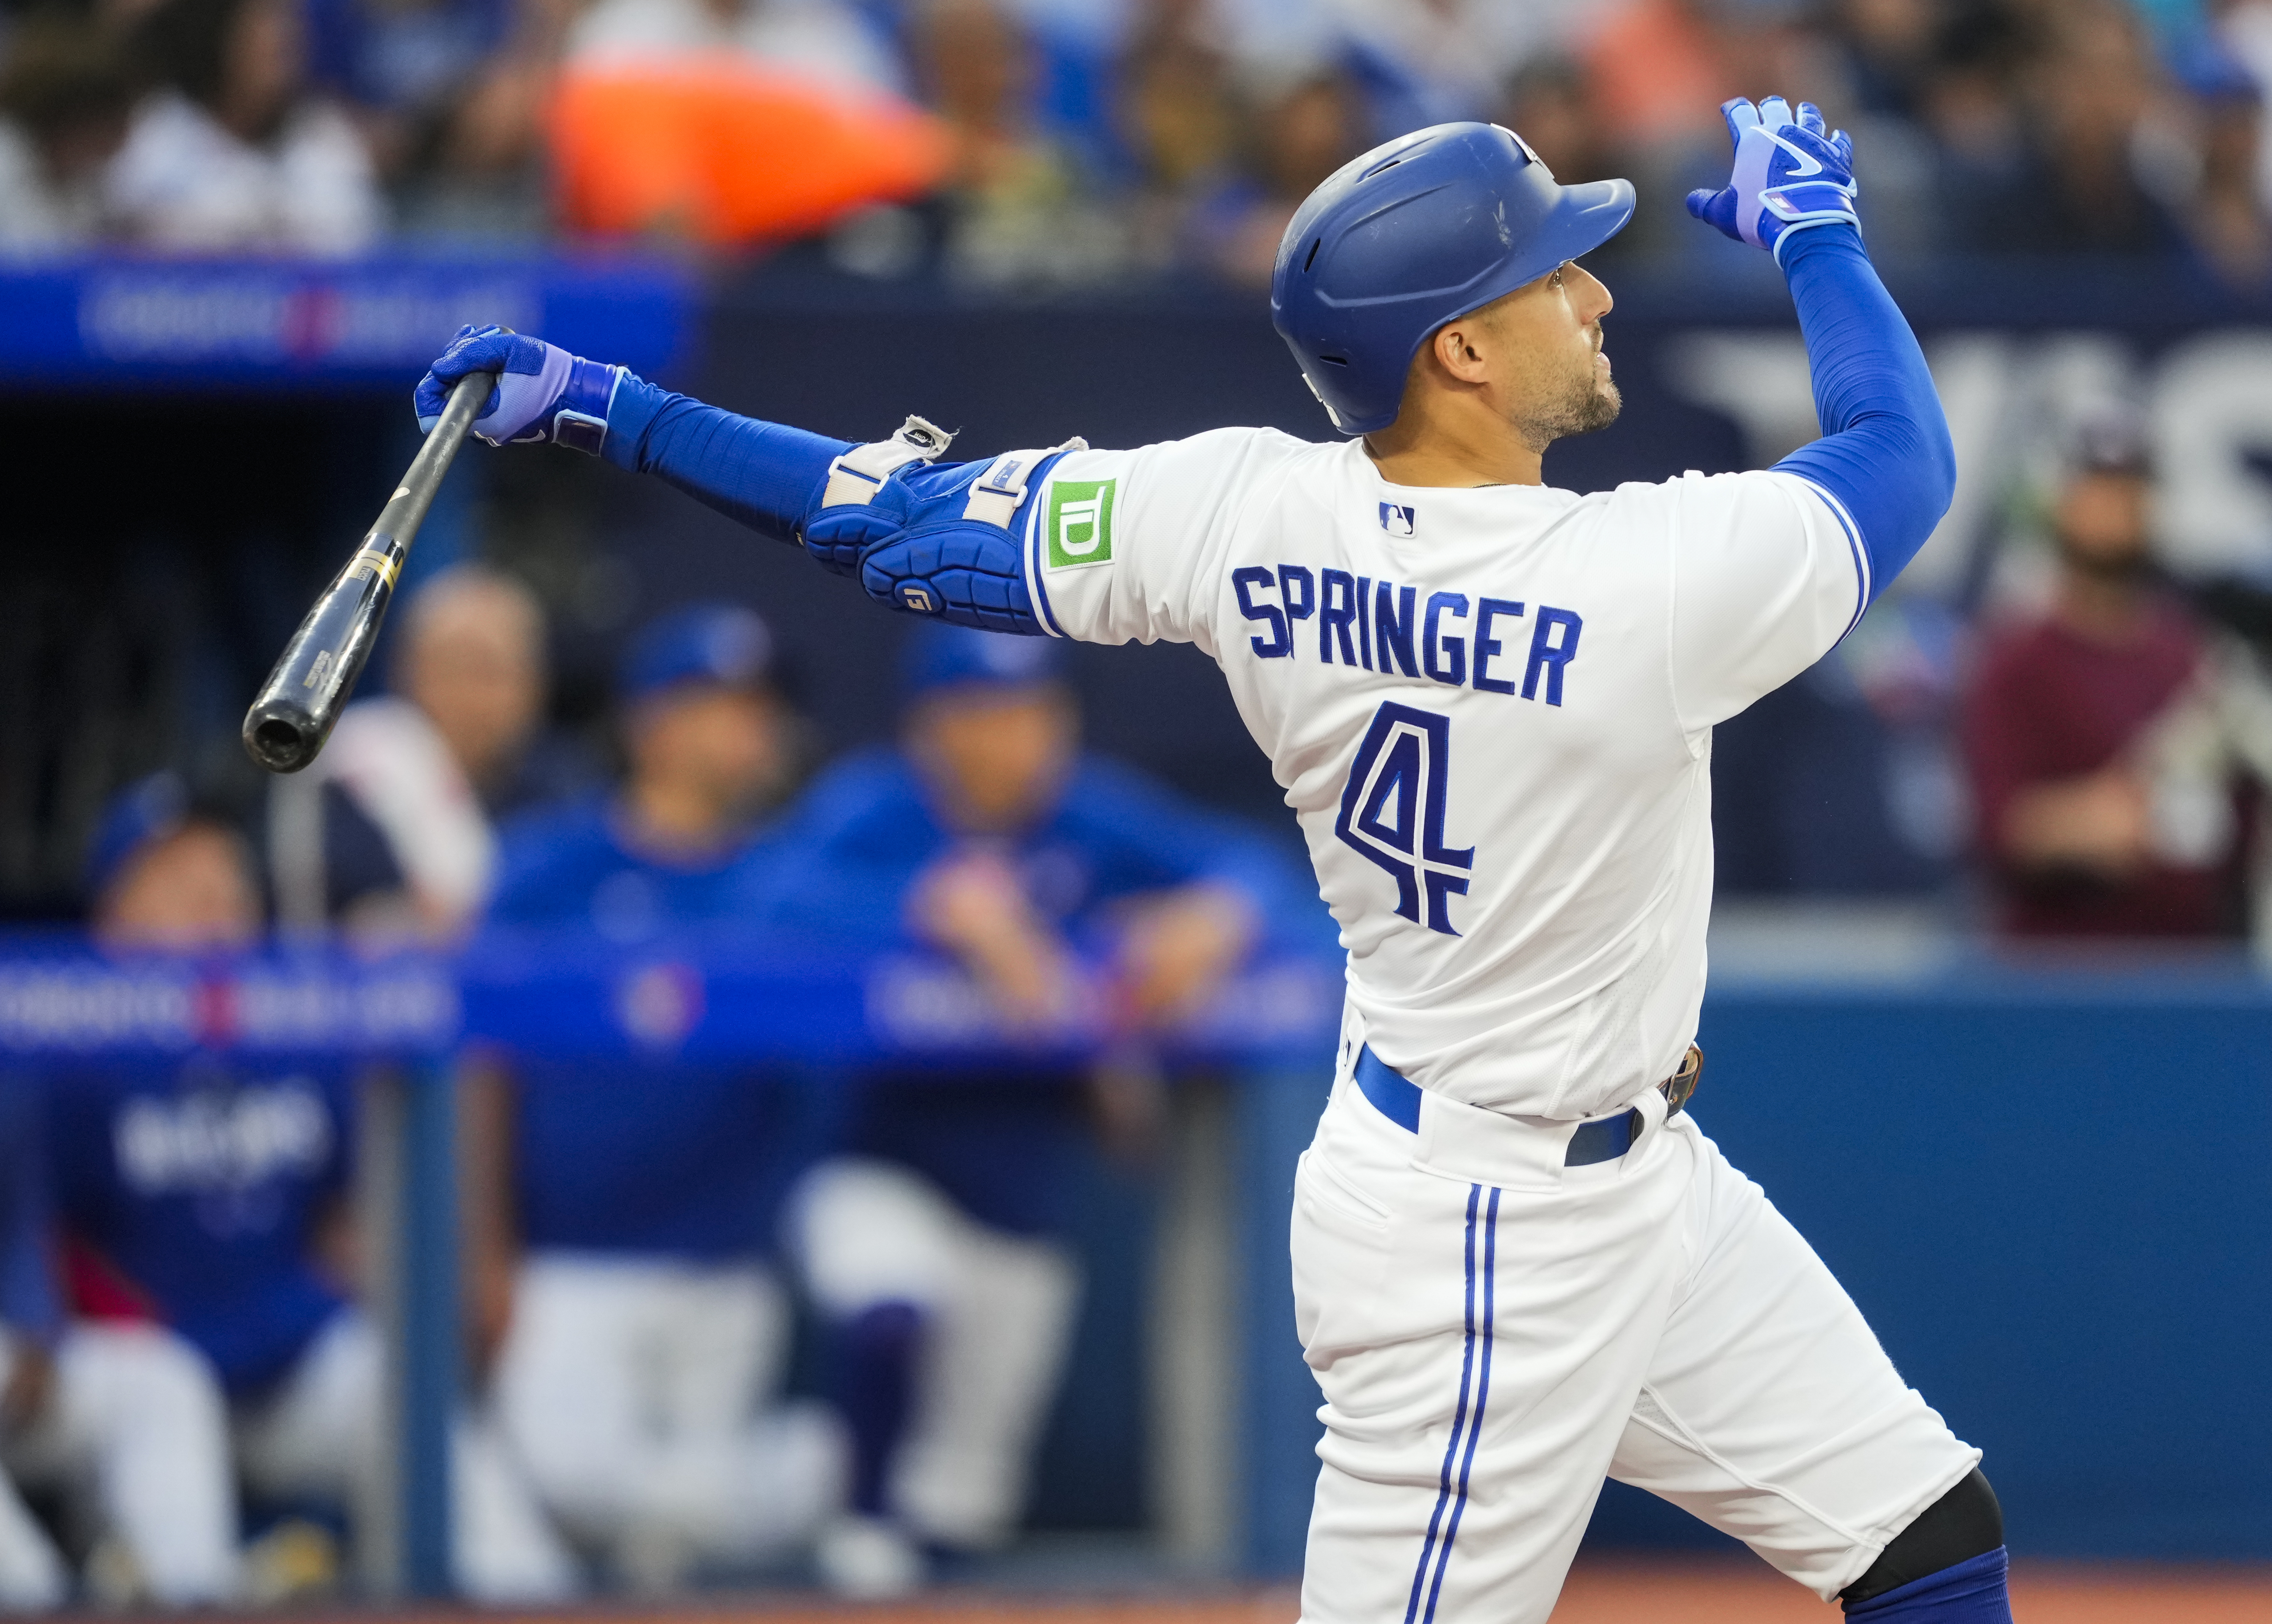 Springer's RBI single helps him avoid dubious record and leads Blue Jays to  4-1 win